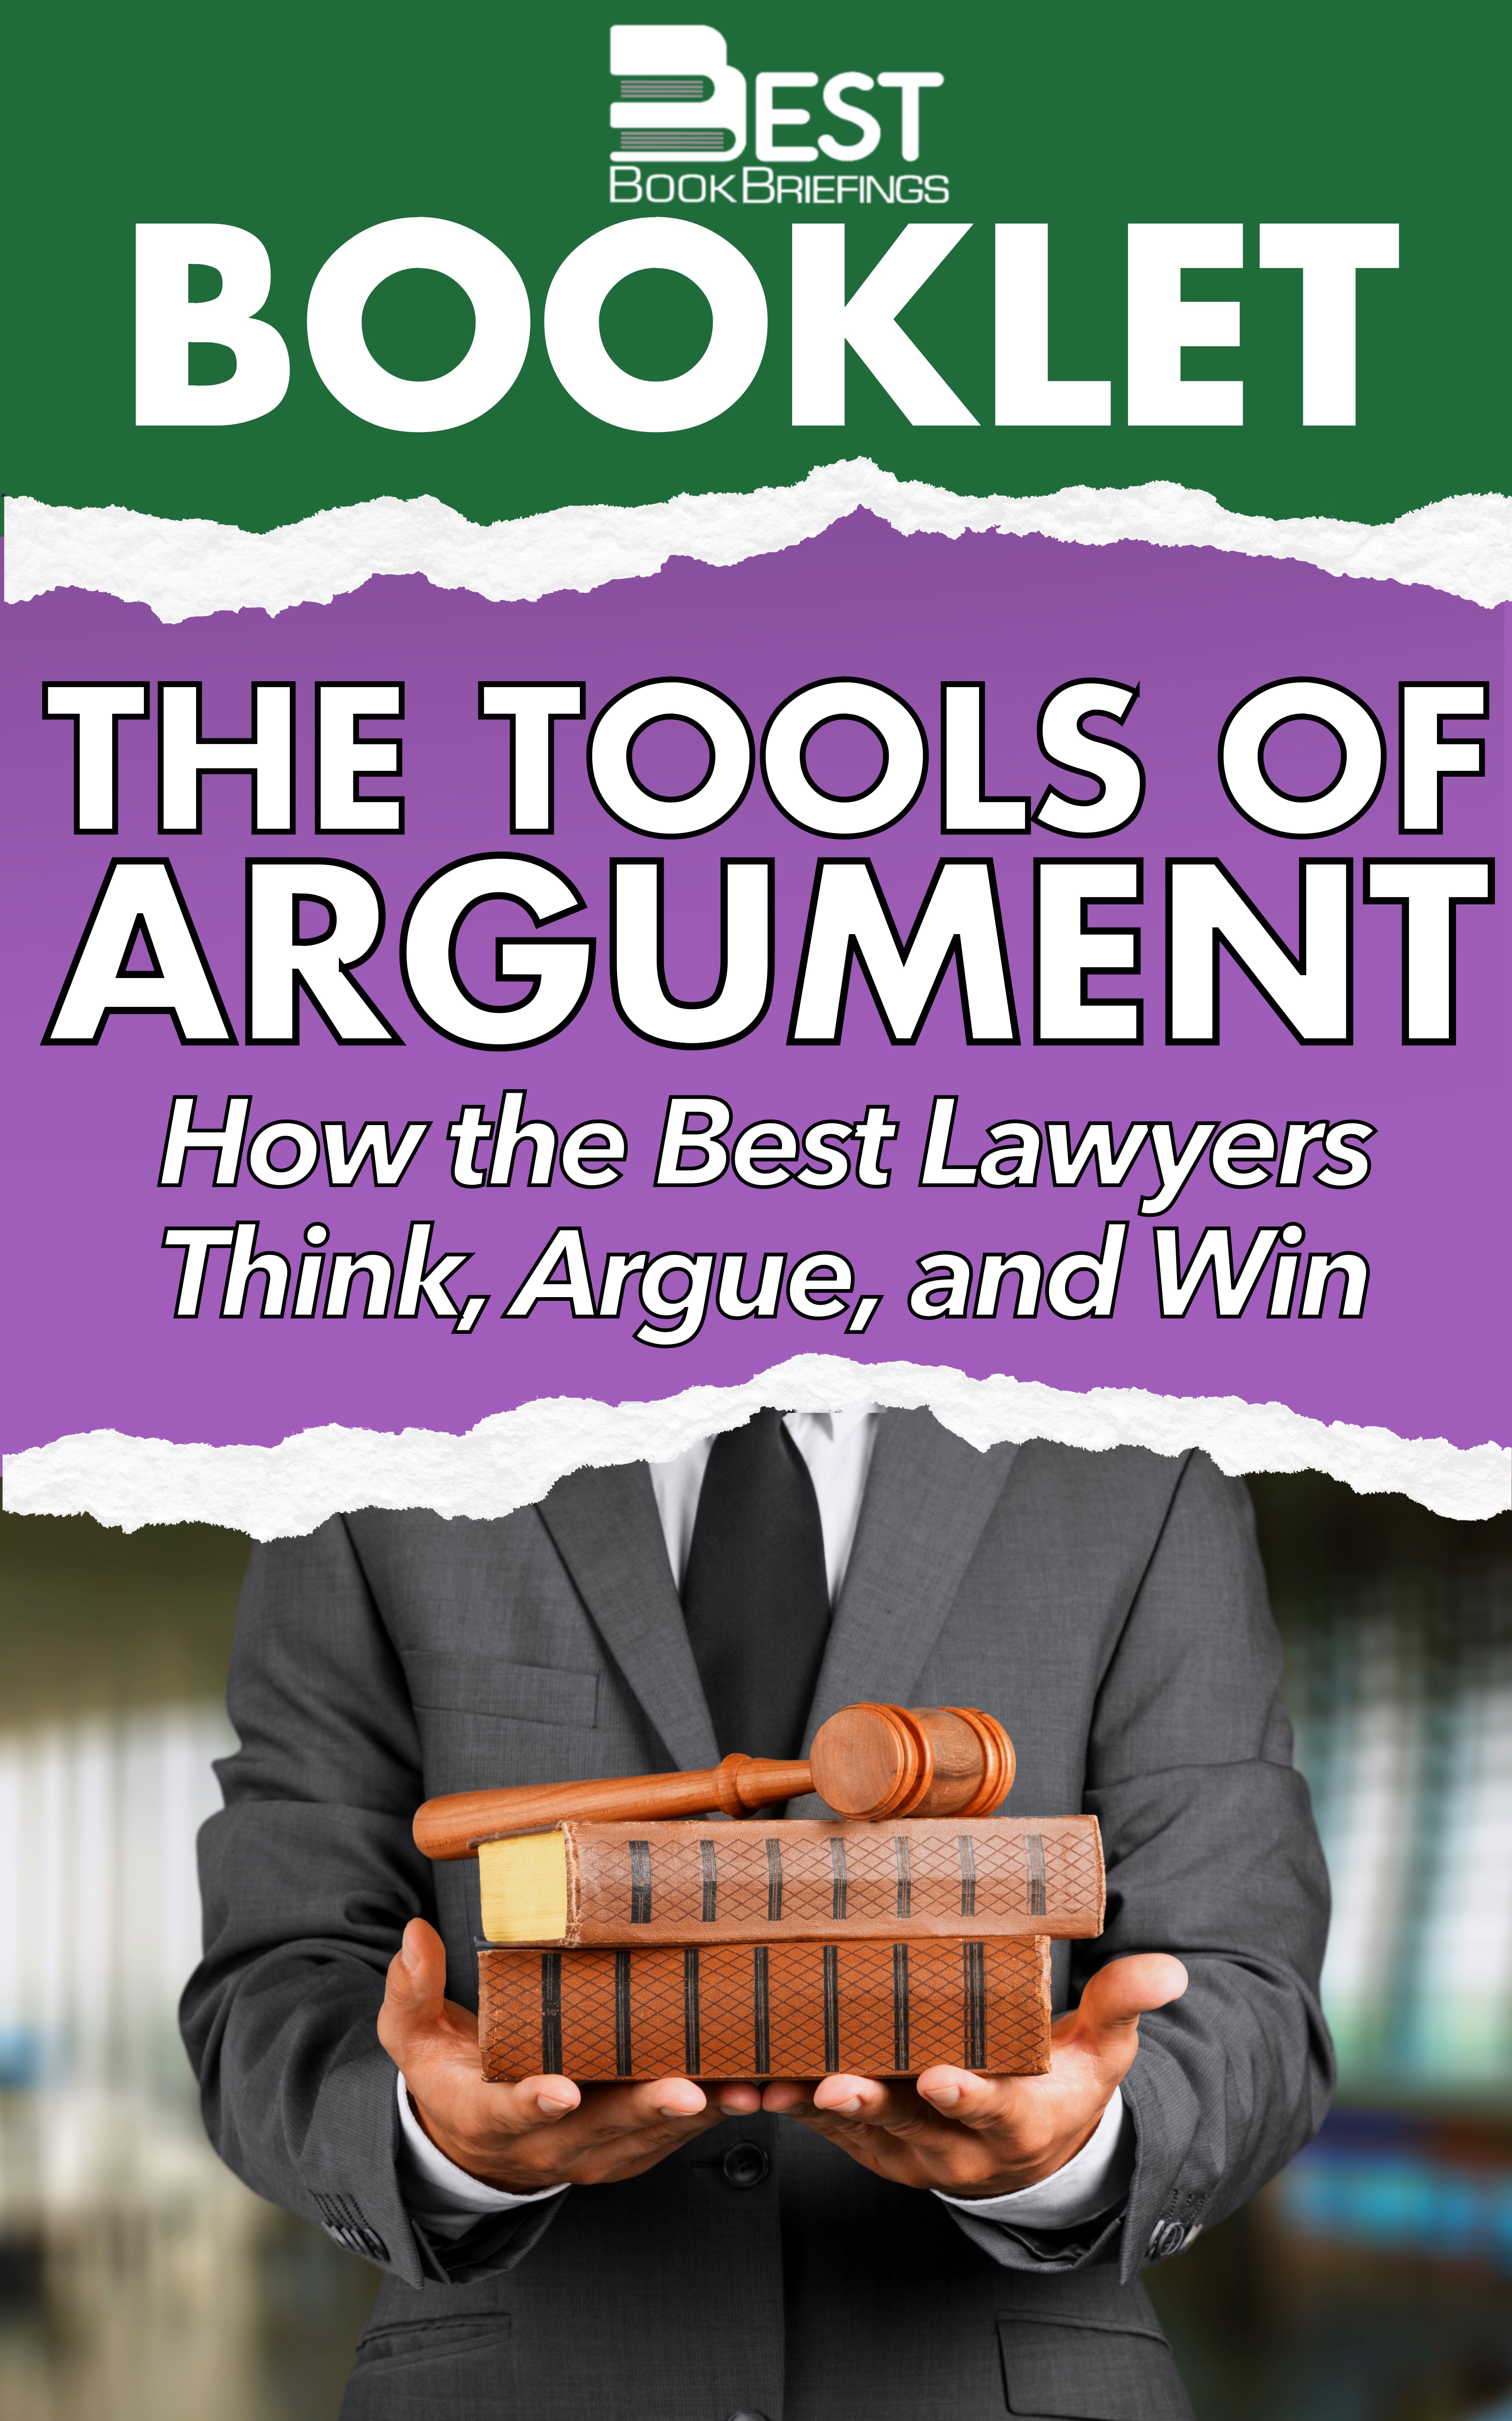 Joel Trachtman's book presents in plain and lucid terms the powerful tools of argument that have been honed through the ages in the discipline of law. If you are a law student or new lawyer, a business professional or a government official, this book will boost your analytical thinking, your foundational 